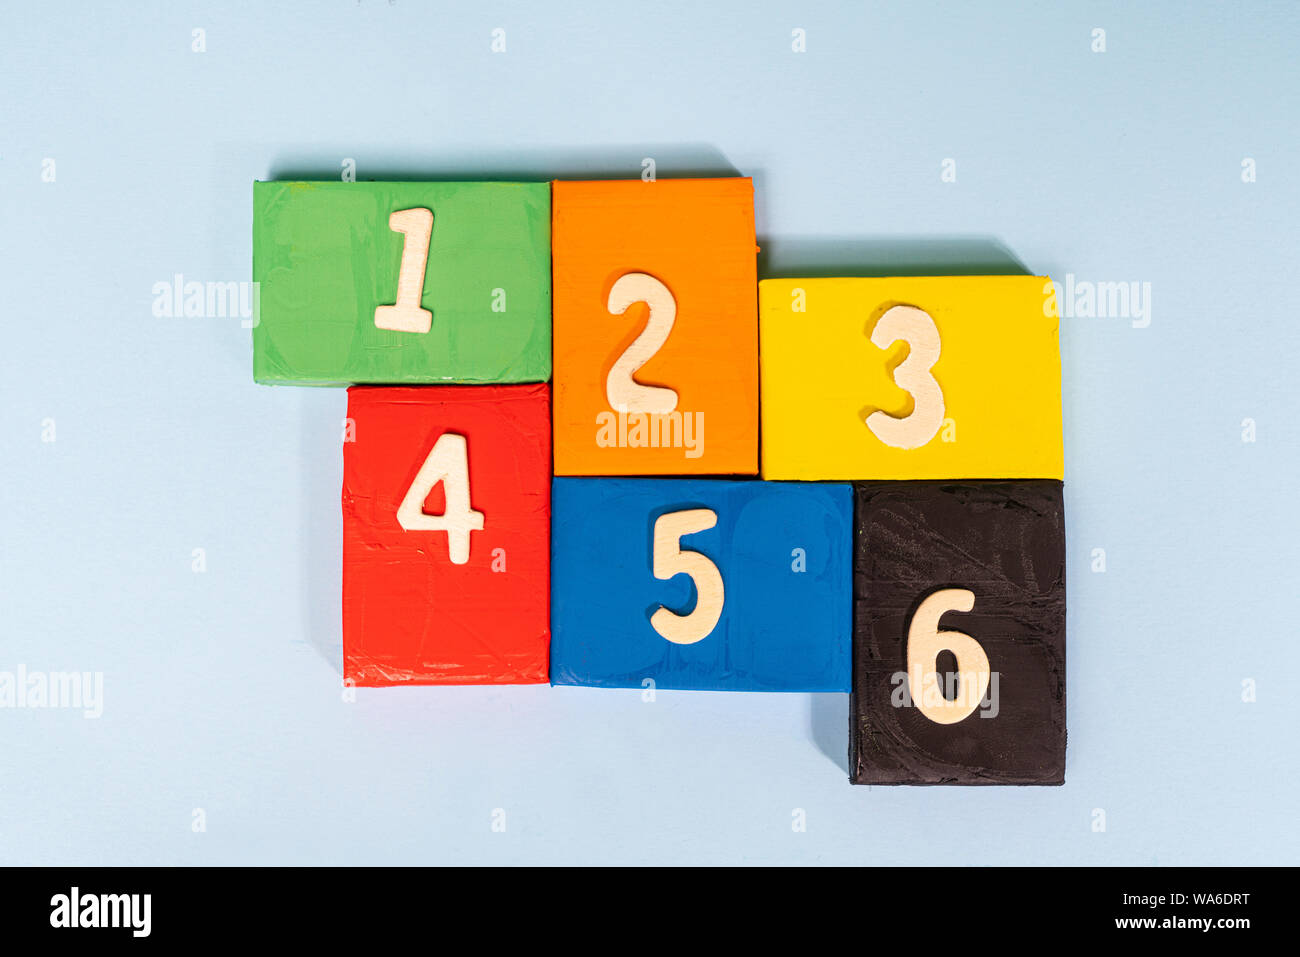 the numbers arranged on colored tiles Stock Photo